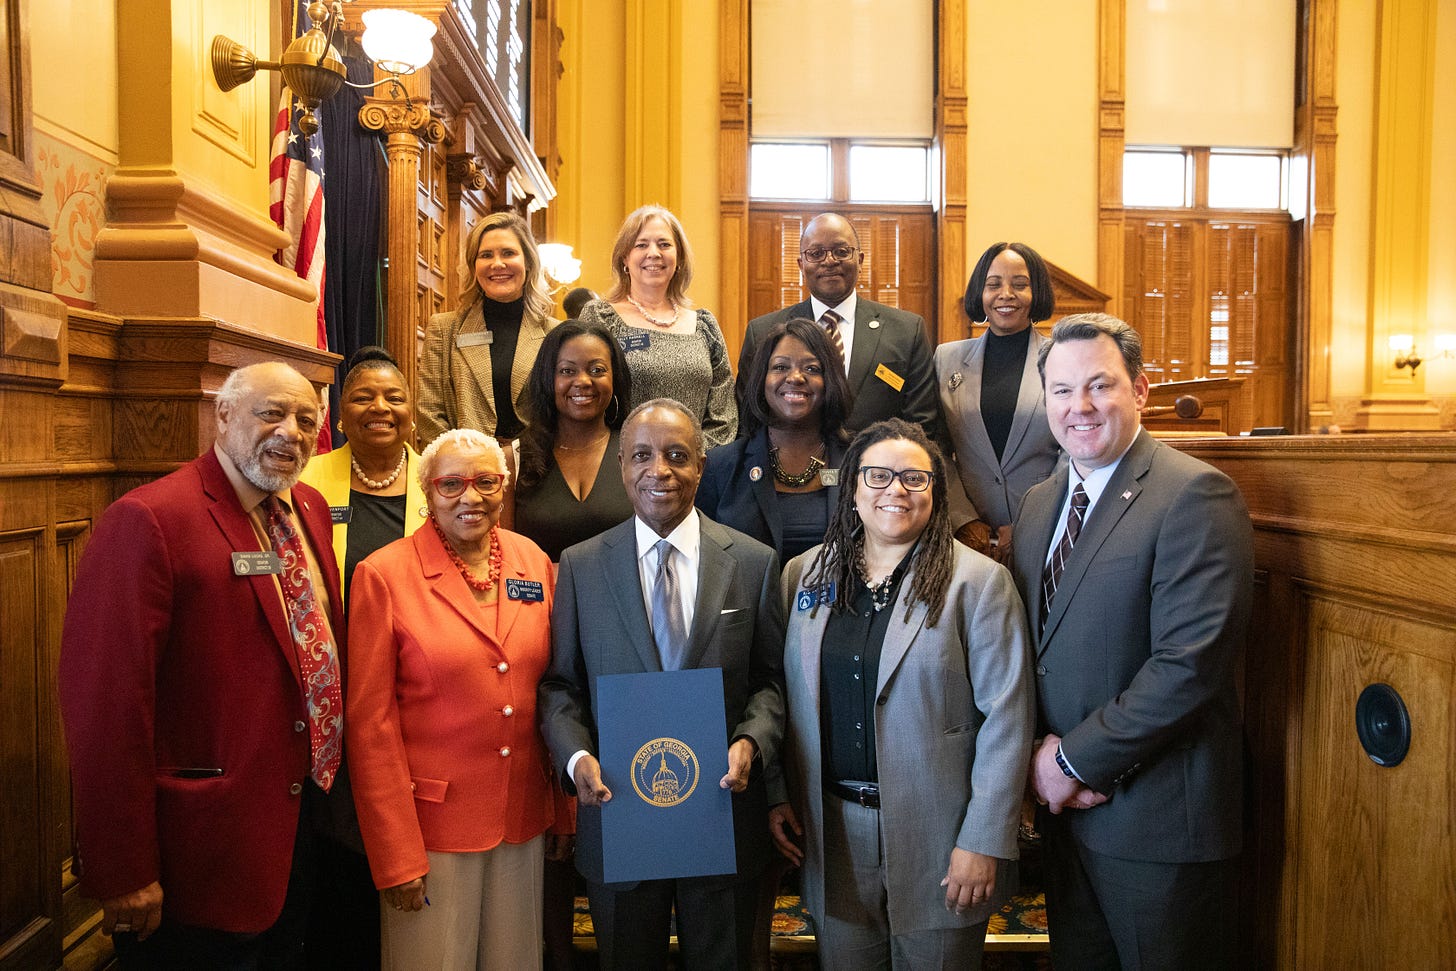 Tuesday was DeKalb County Day at the Capitol. It was good to see county staff, the CEO and the Commissioners!